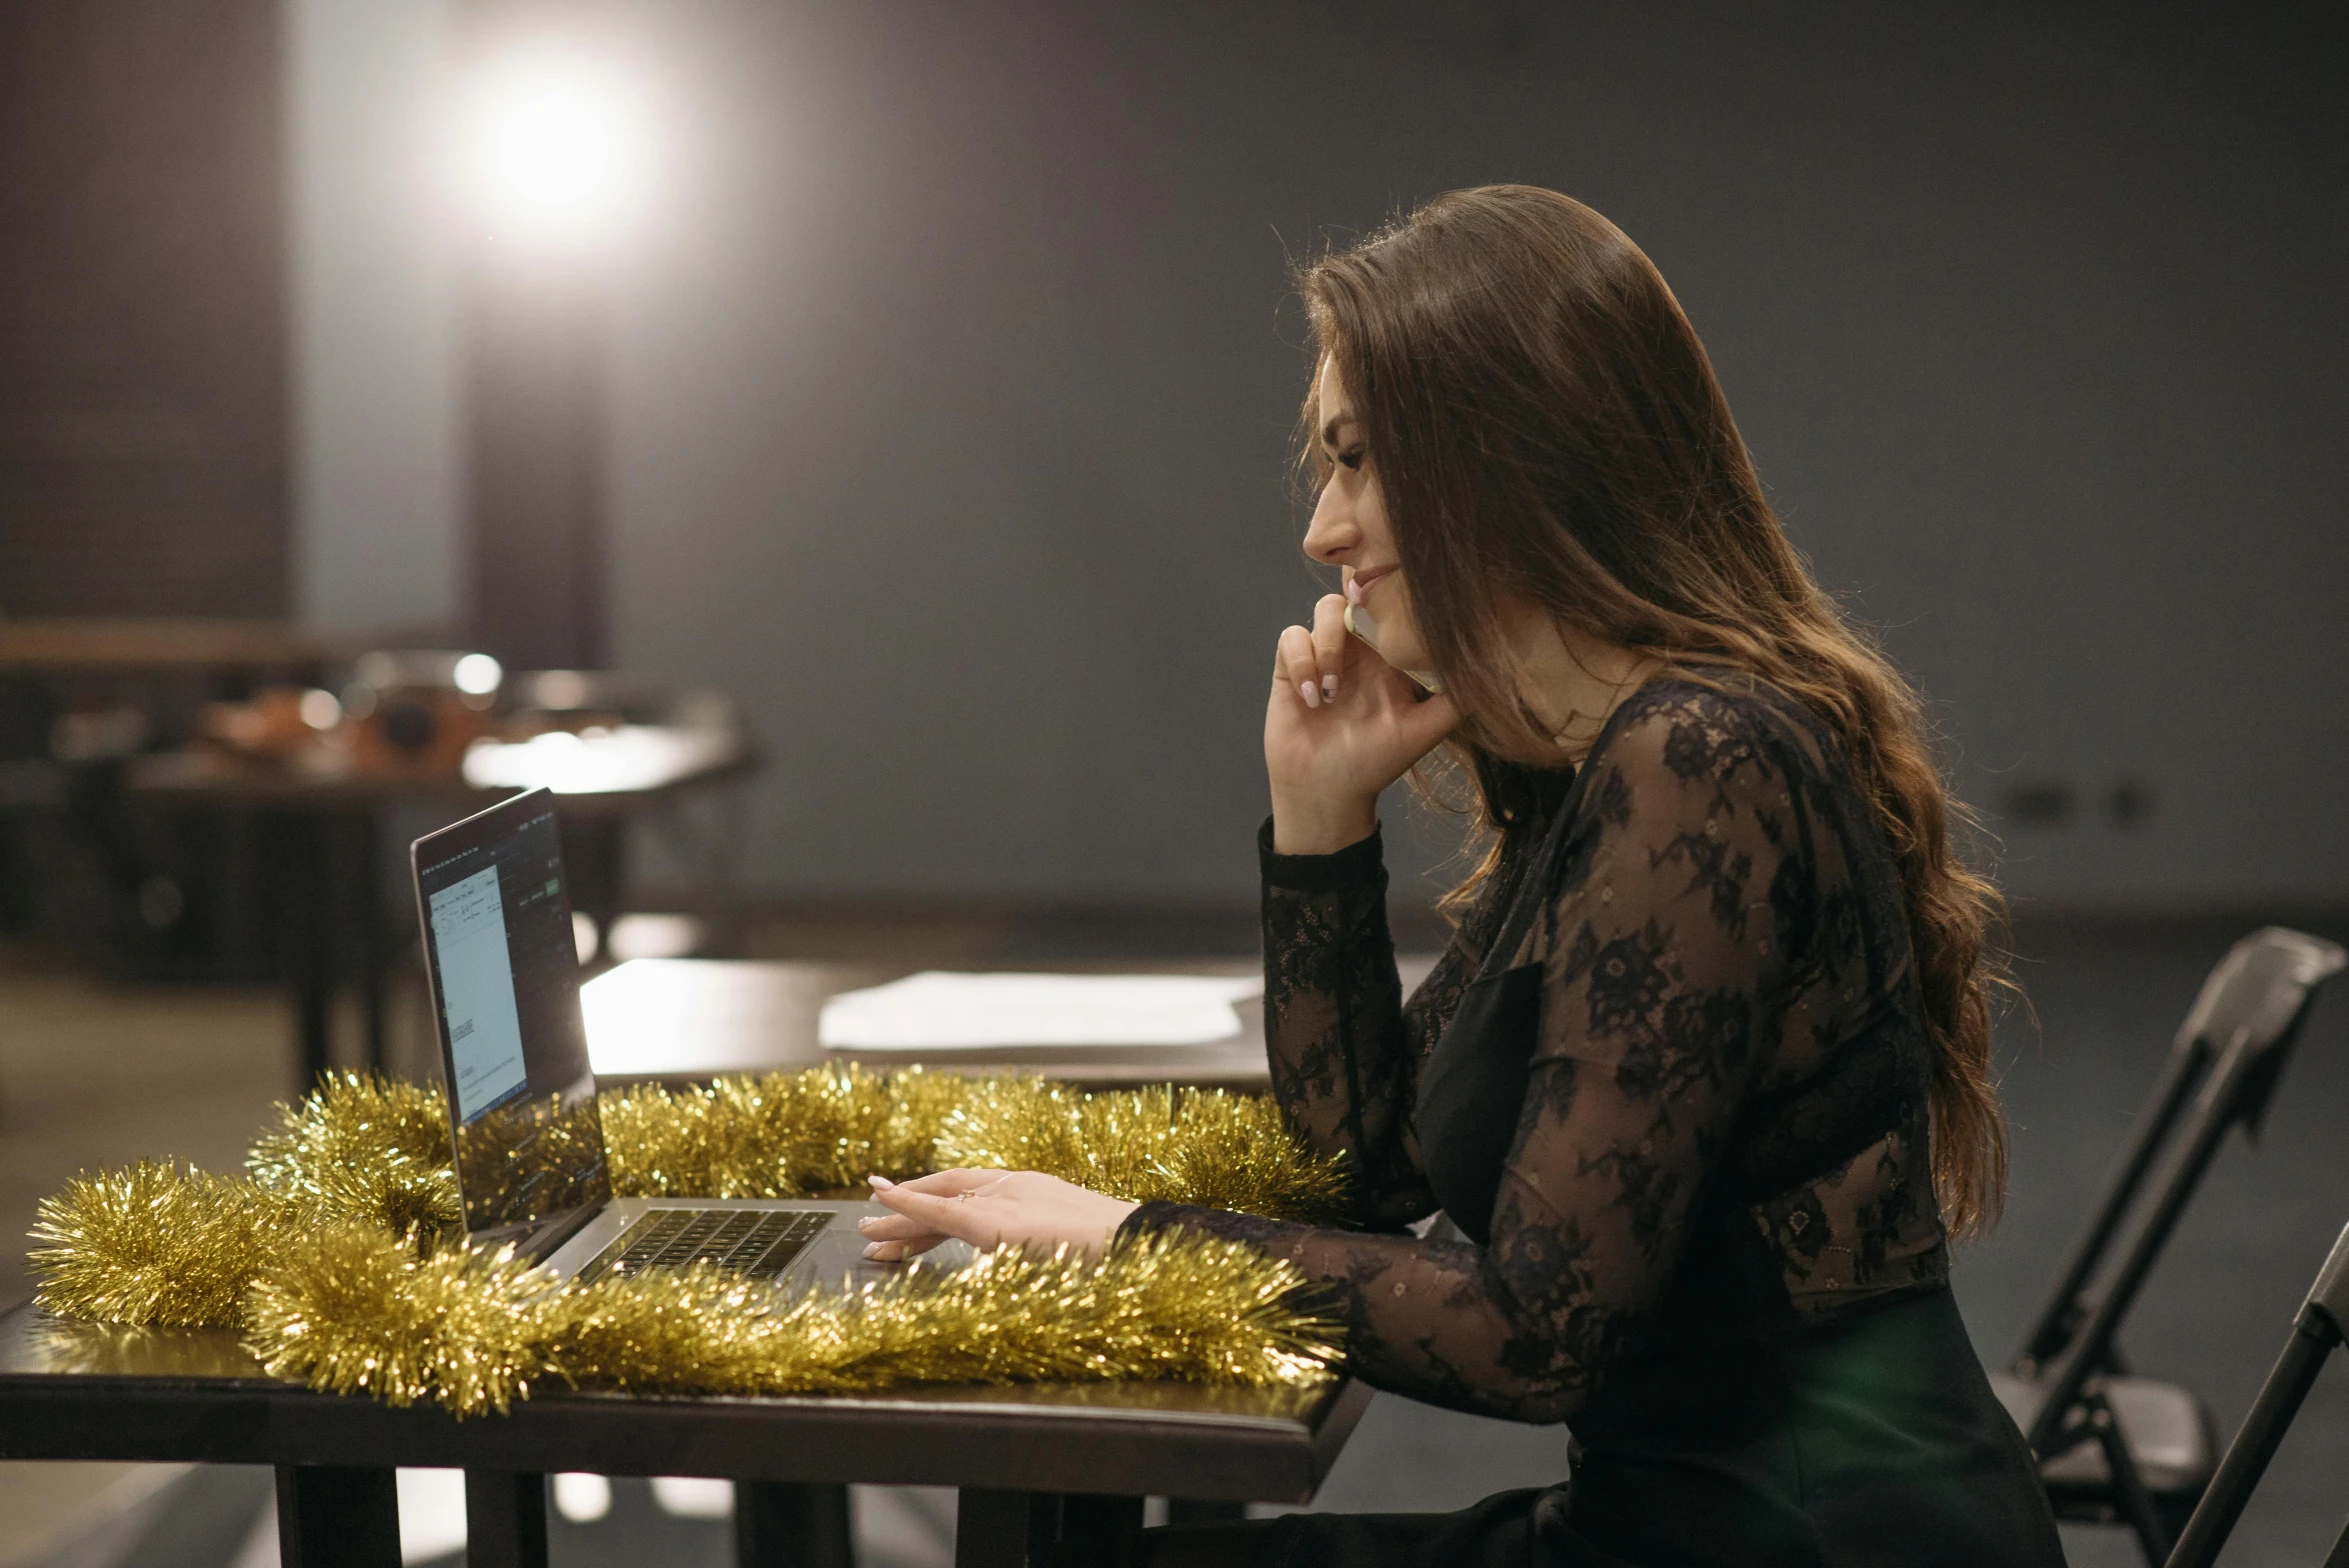 a woman sitting at a table with a laptop, wearing festive clothing, profile image, awkward, behind the scenes photo